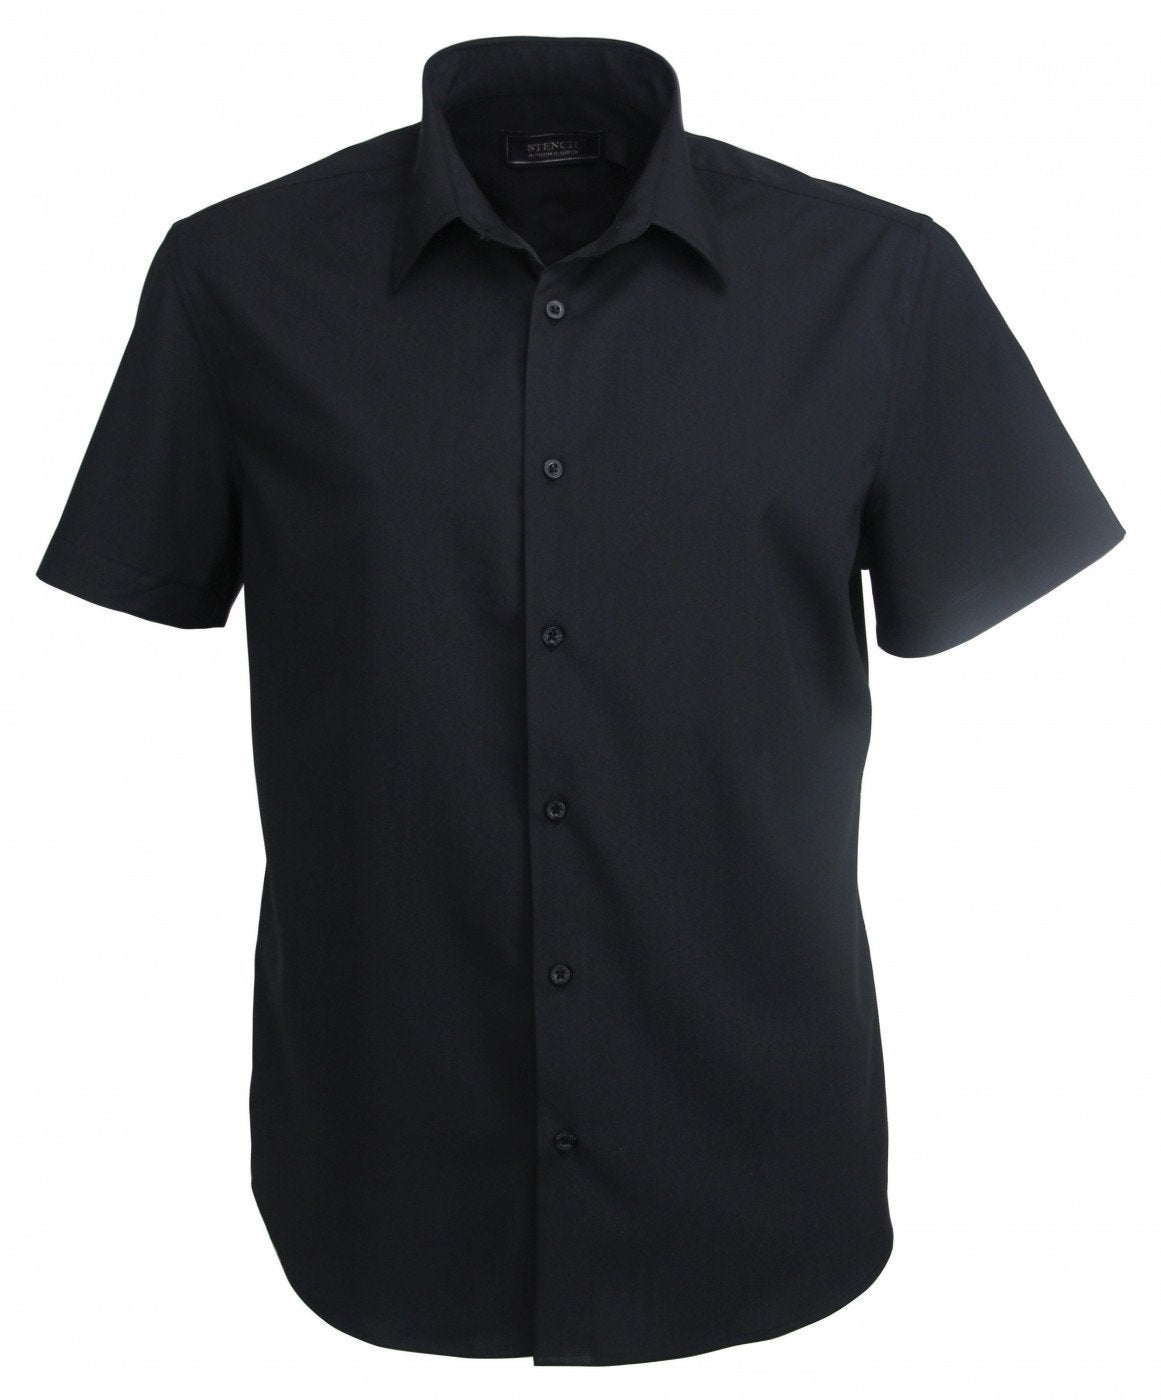 Mens Candidate Shirt S/S